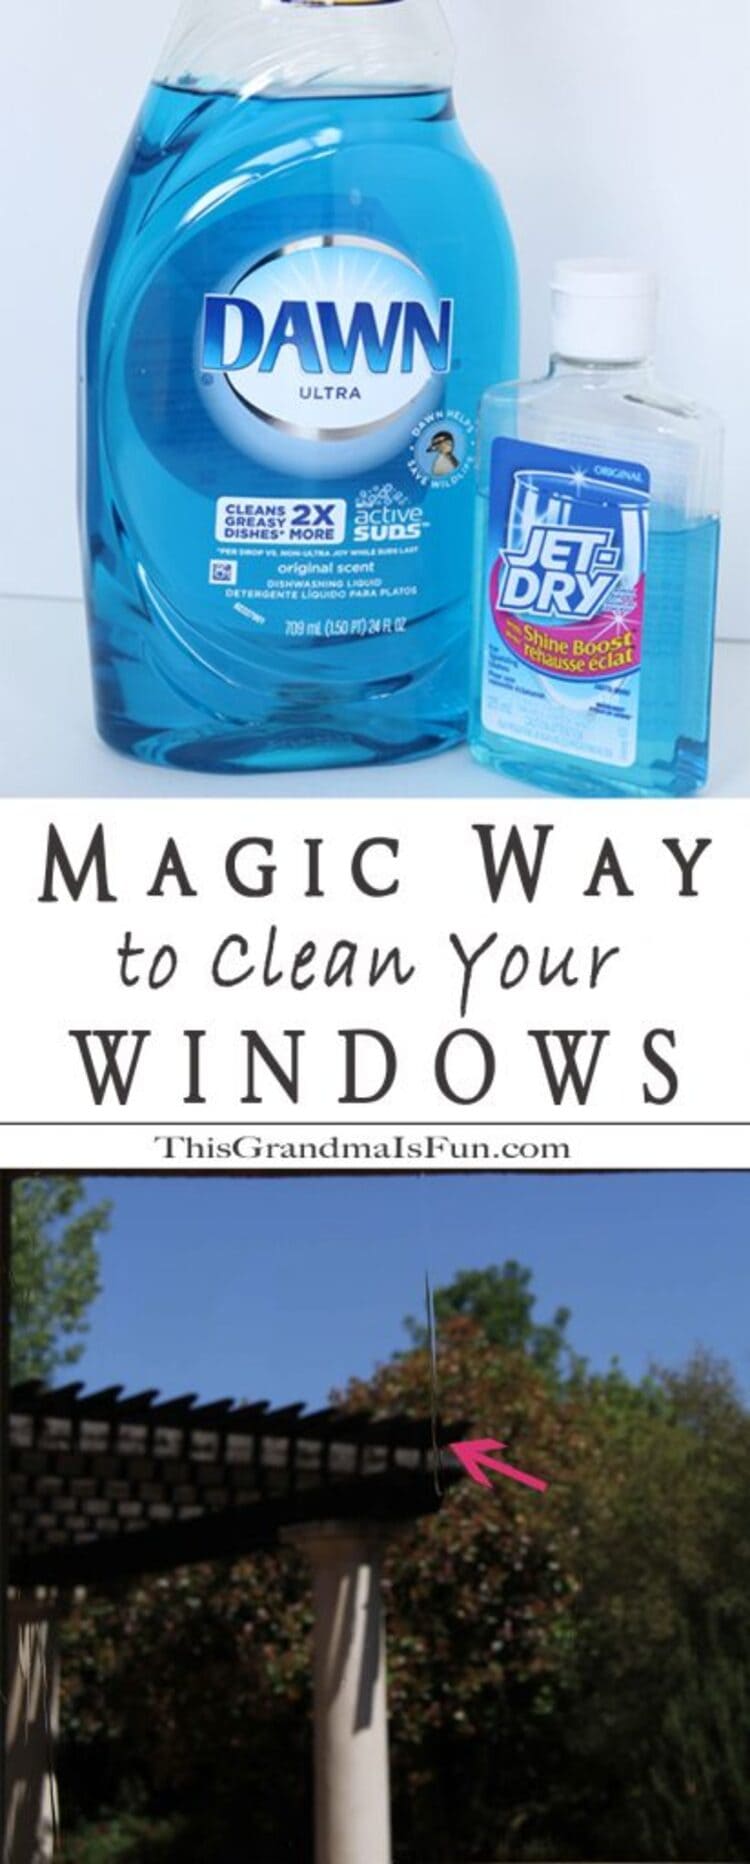 Photo Collage of Cleaning Supplies i.e Dawn Detergent and Jet Dry and Window with Large Water Drip While Drying